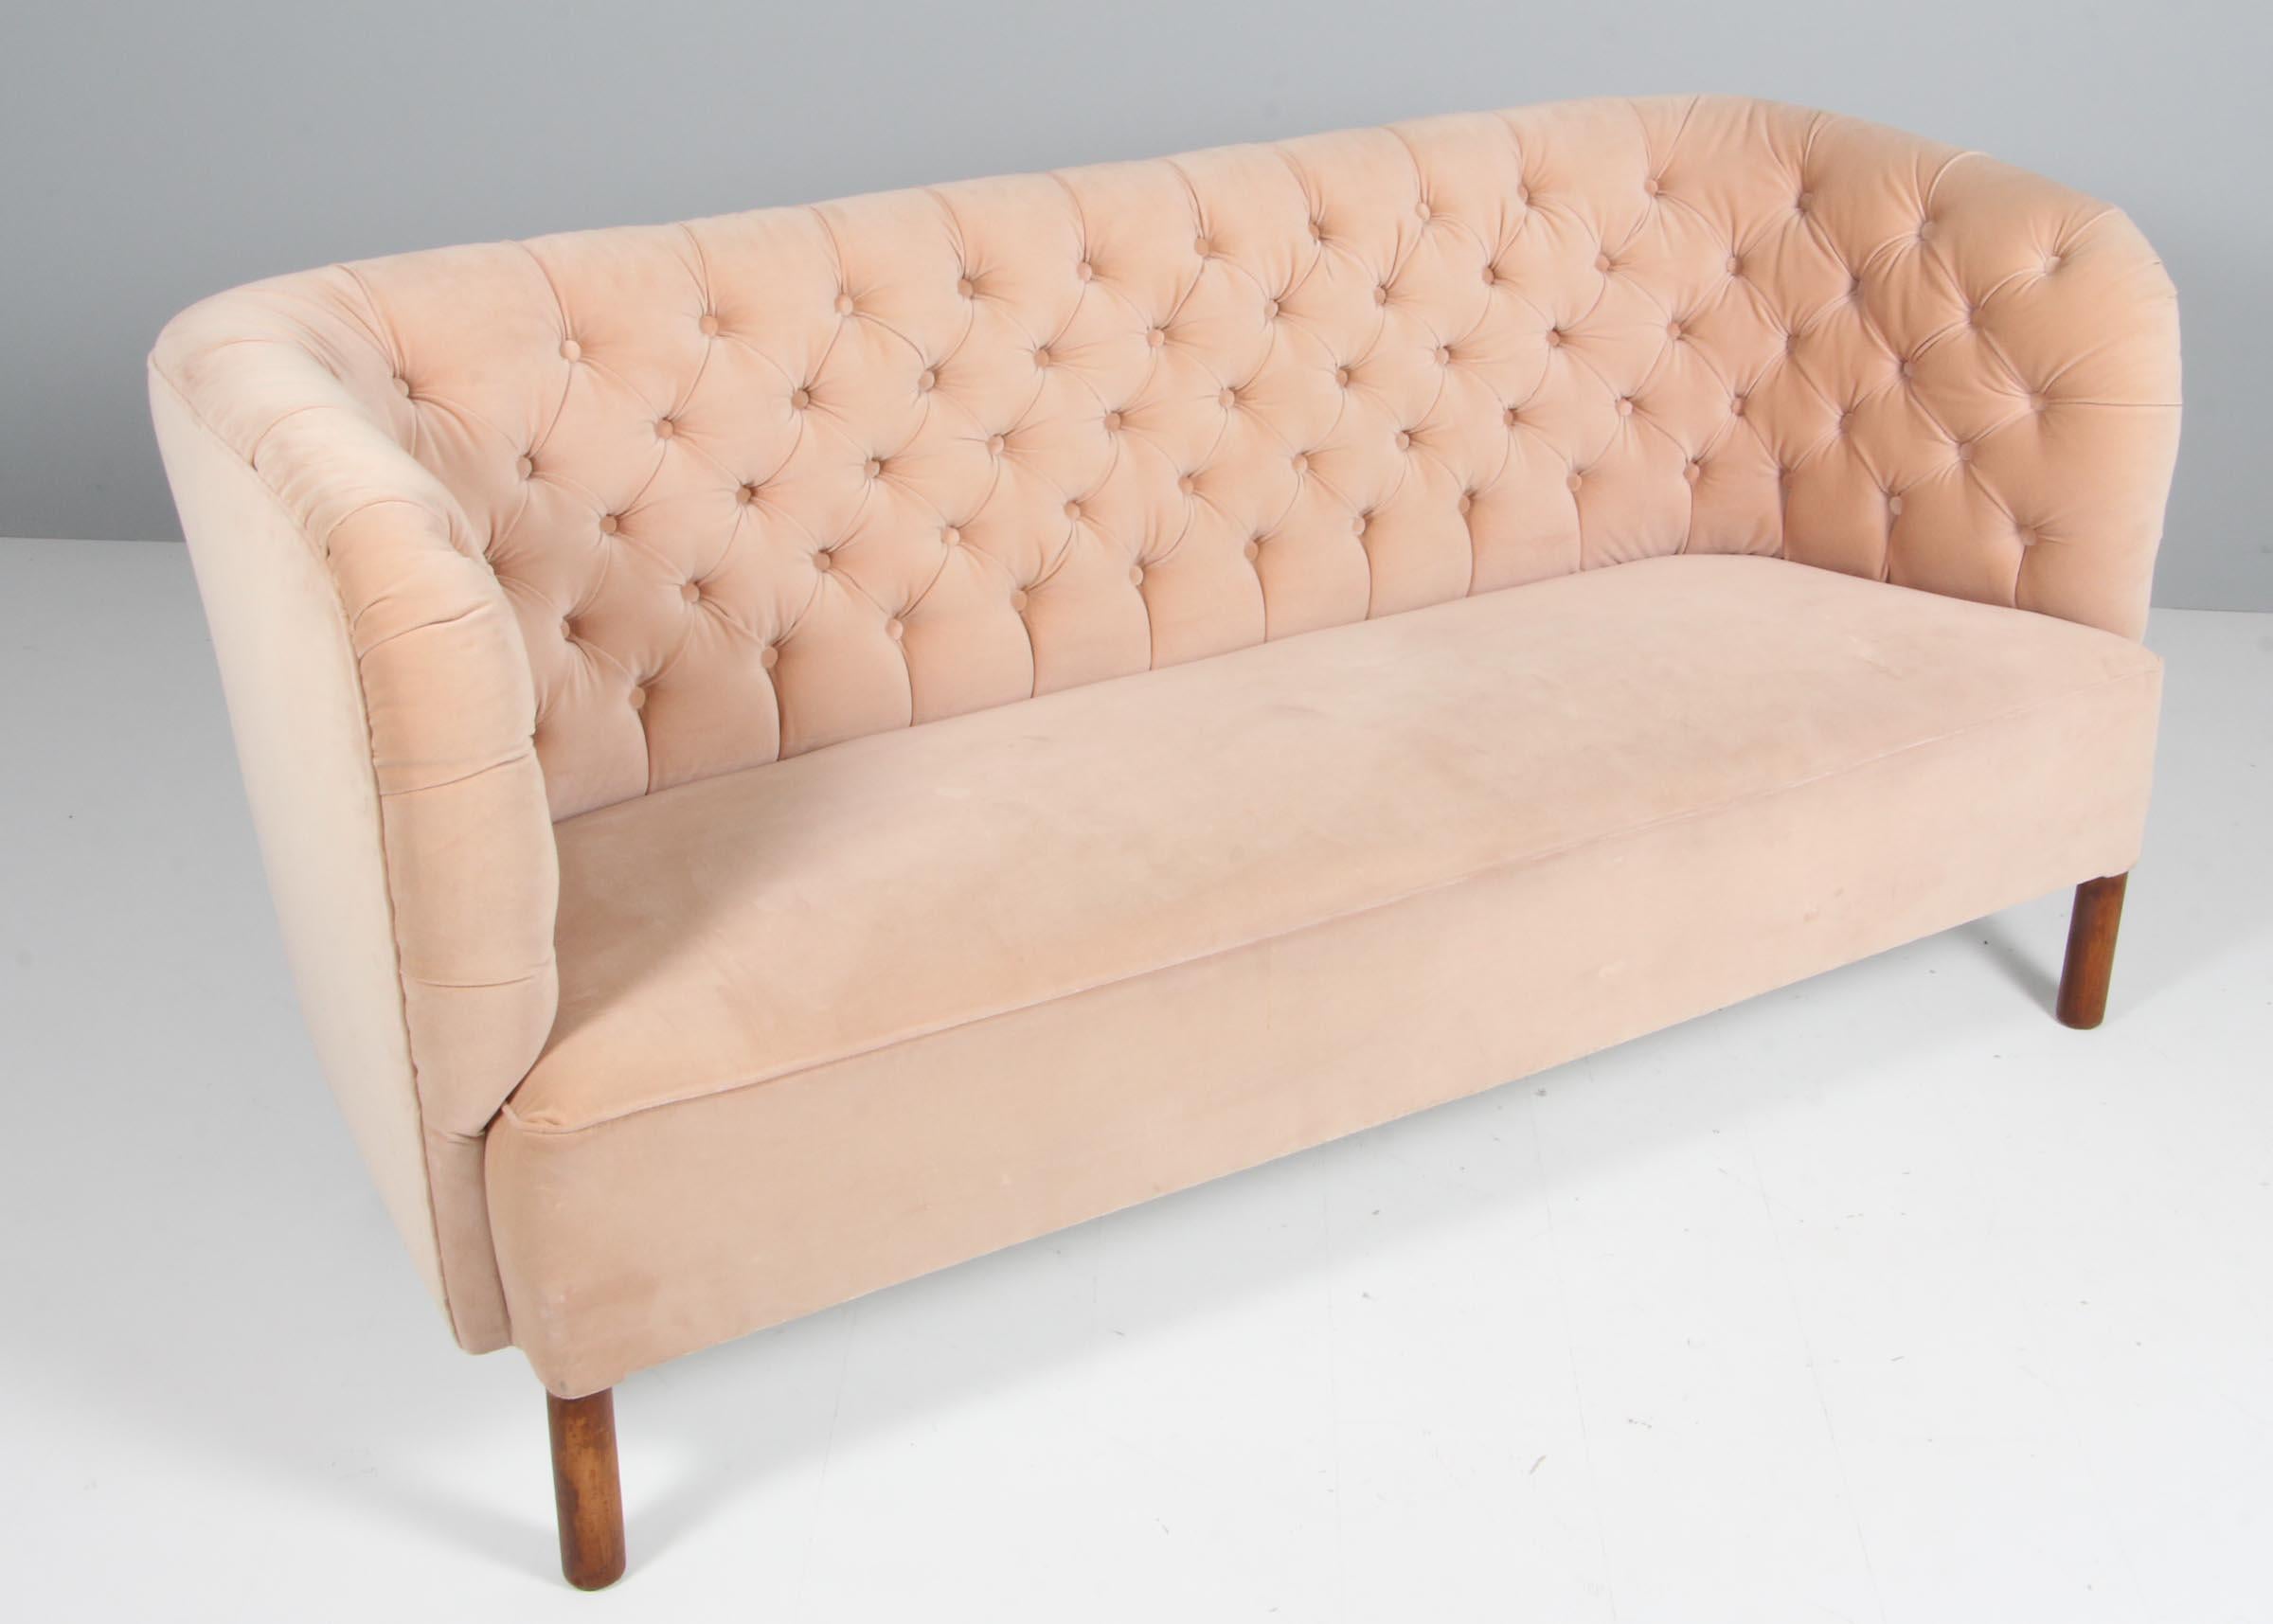 An early Danish modernist sofa with an organic form similar to works by important architects such as Viggo Boesen, Philip Arctander, Peder Moos and Flemming and Mogens Lassen. Presumably manufactured by N,C. Christophersen, in the 1940s